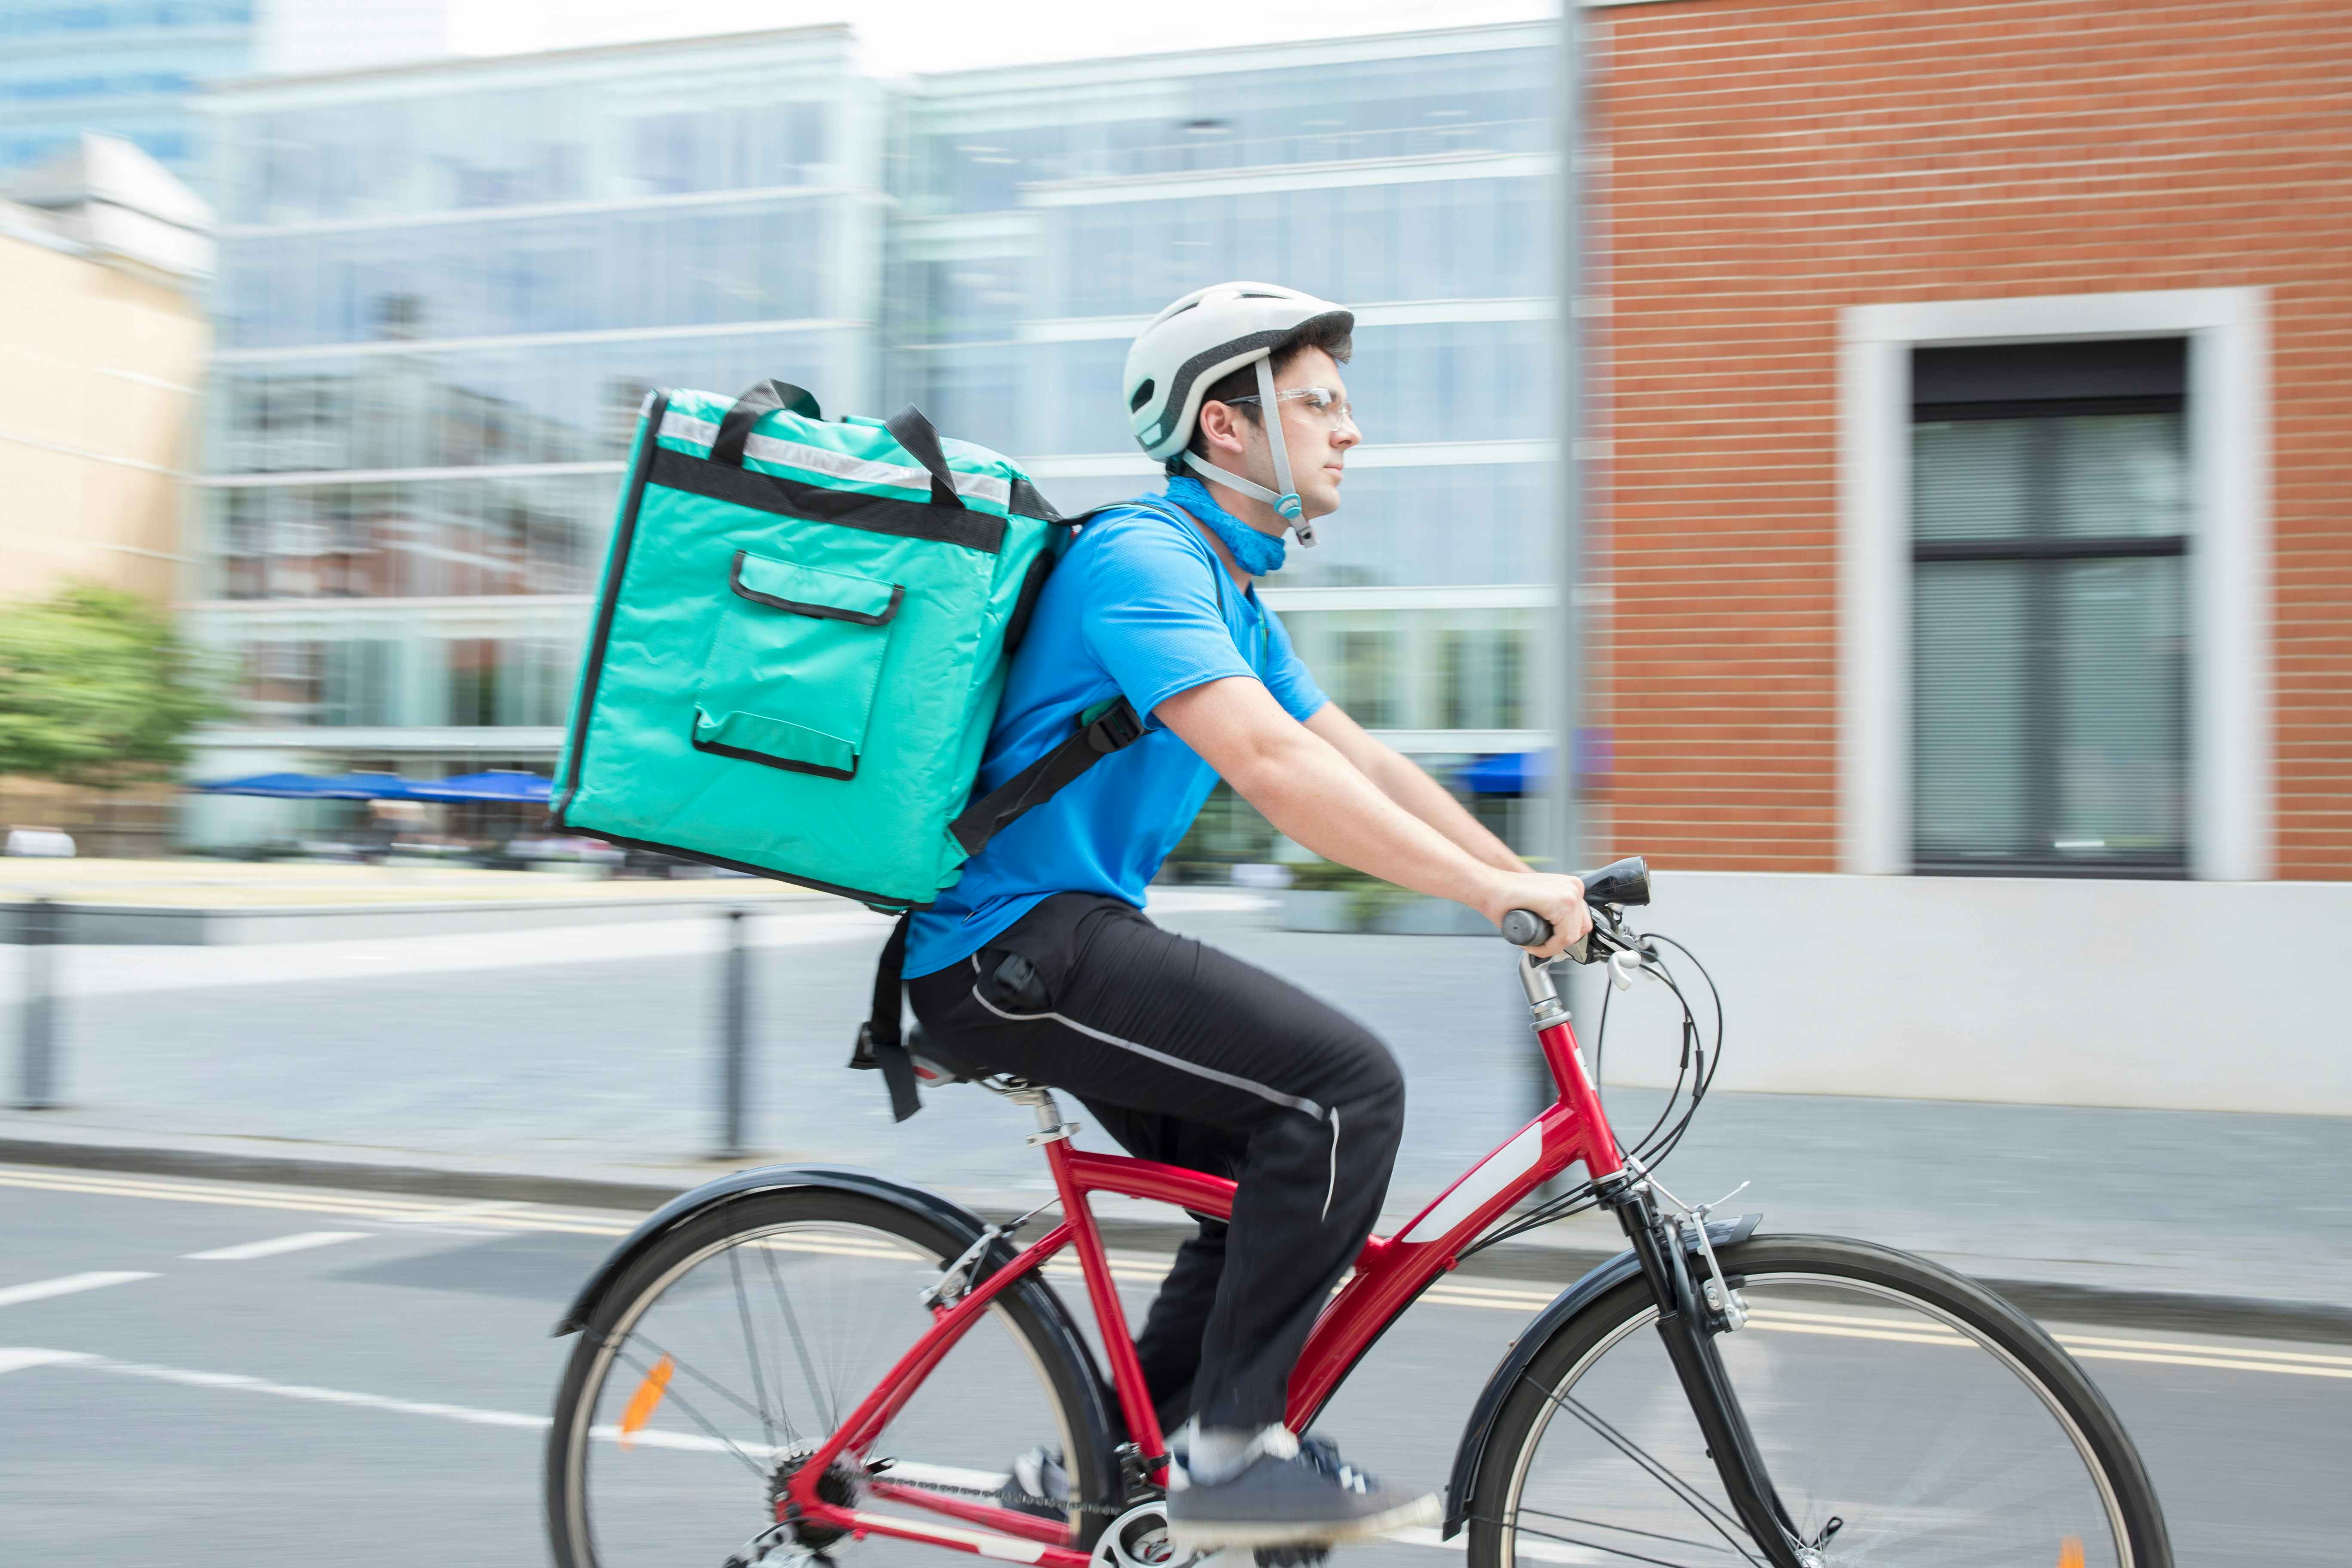 Courier riding a bicycle